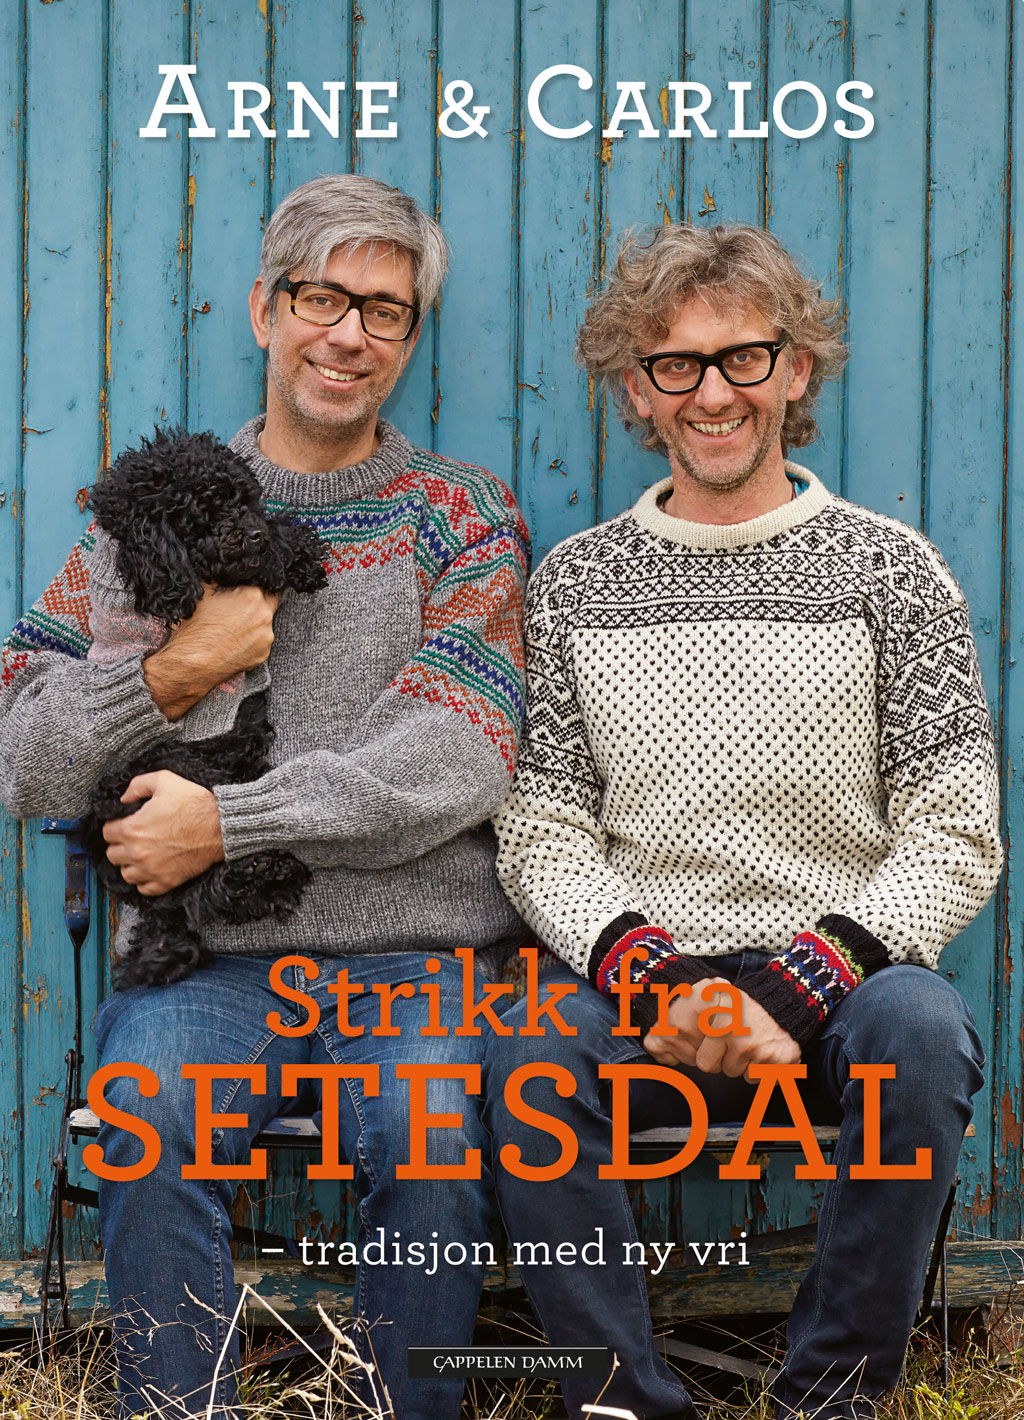 NORWEGIAN KNITS WITH A TWIST